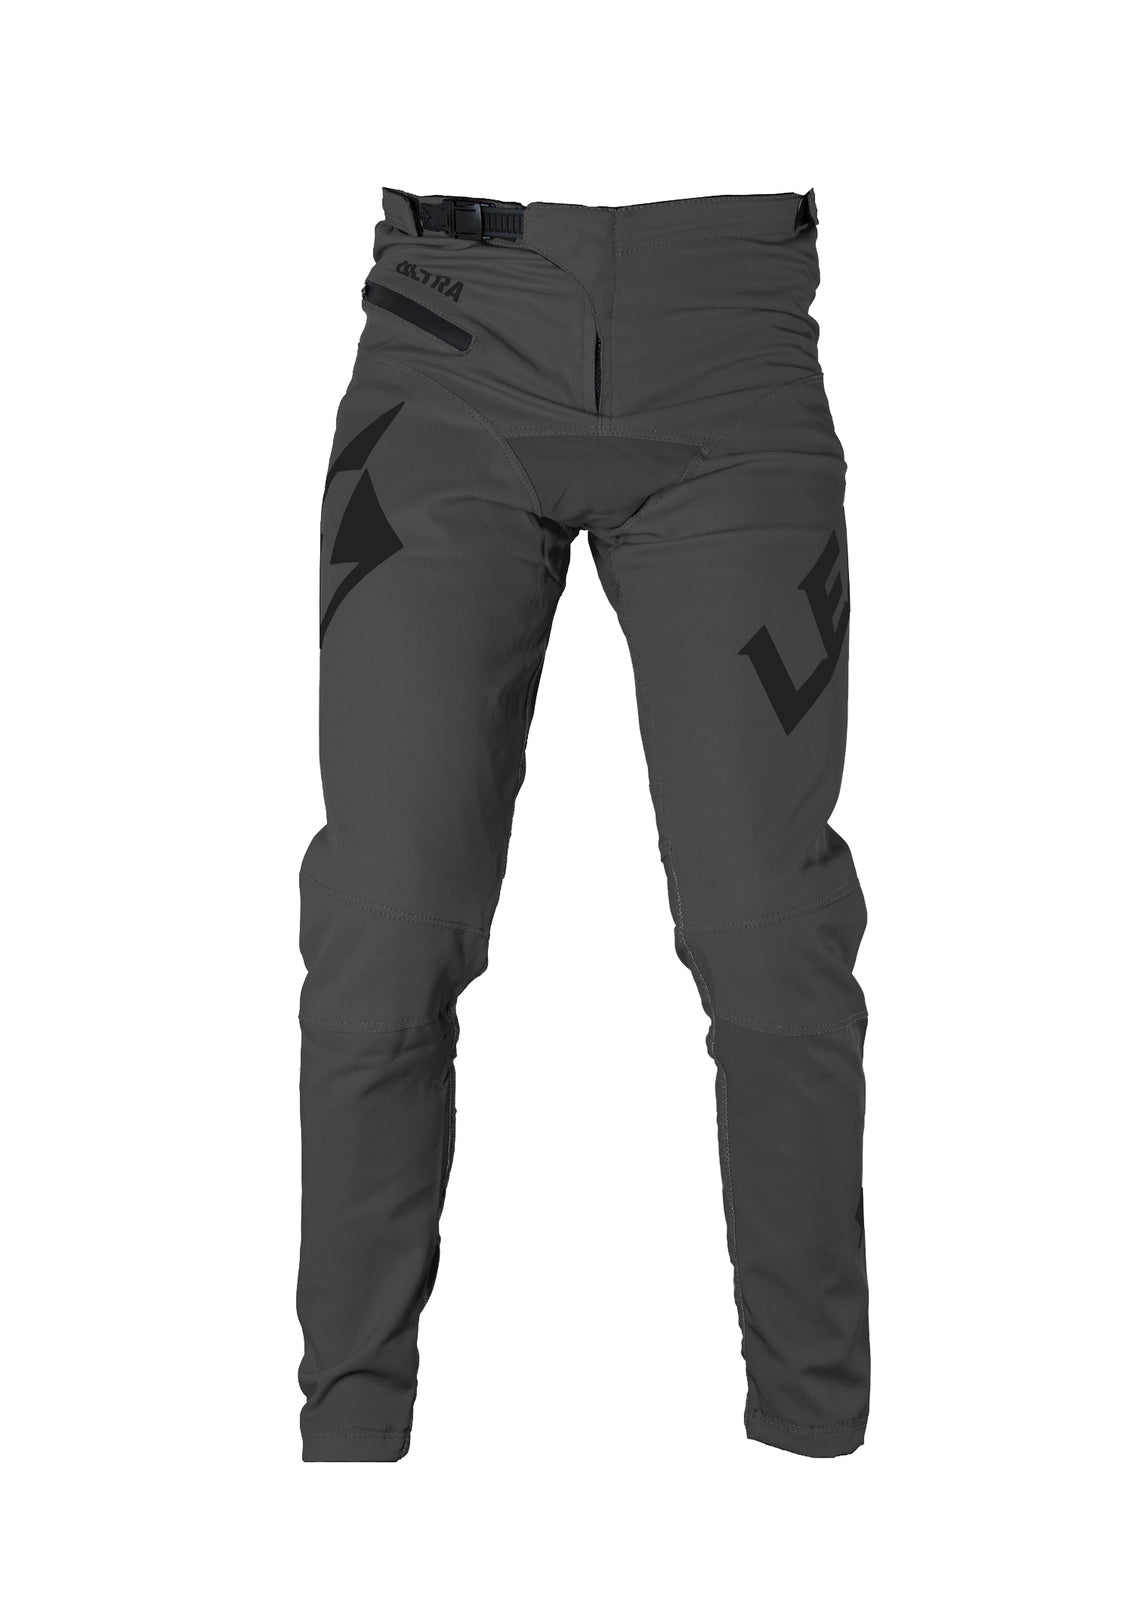 A pair of Lead Ultra Pants, ideal for reducing drag, with a black logo on them.